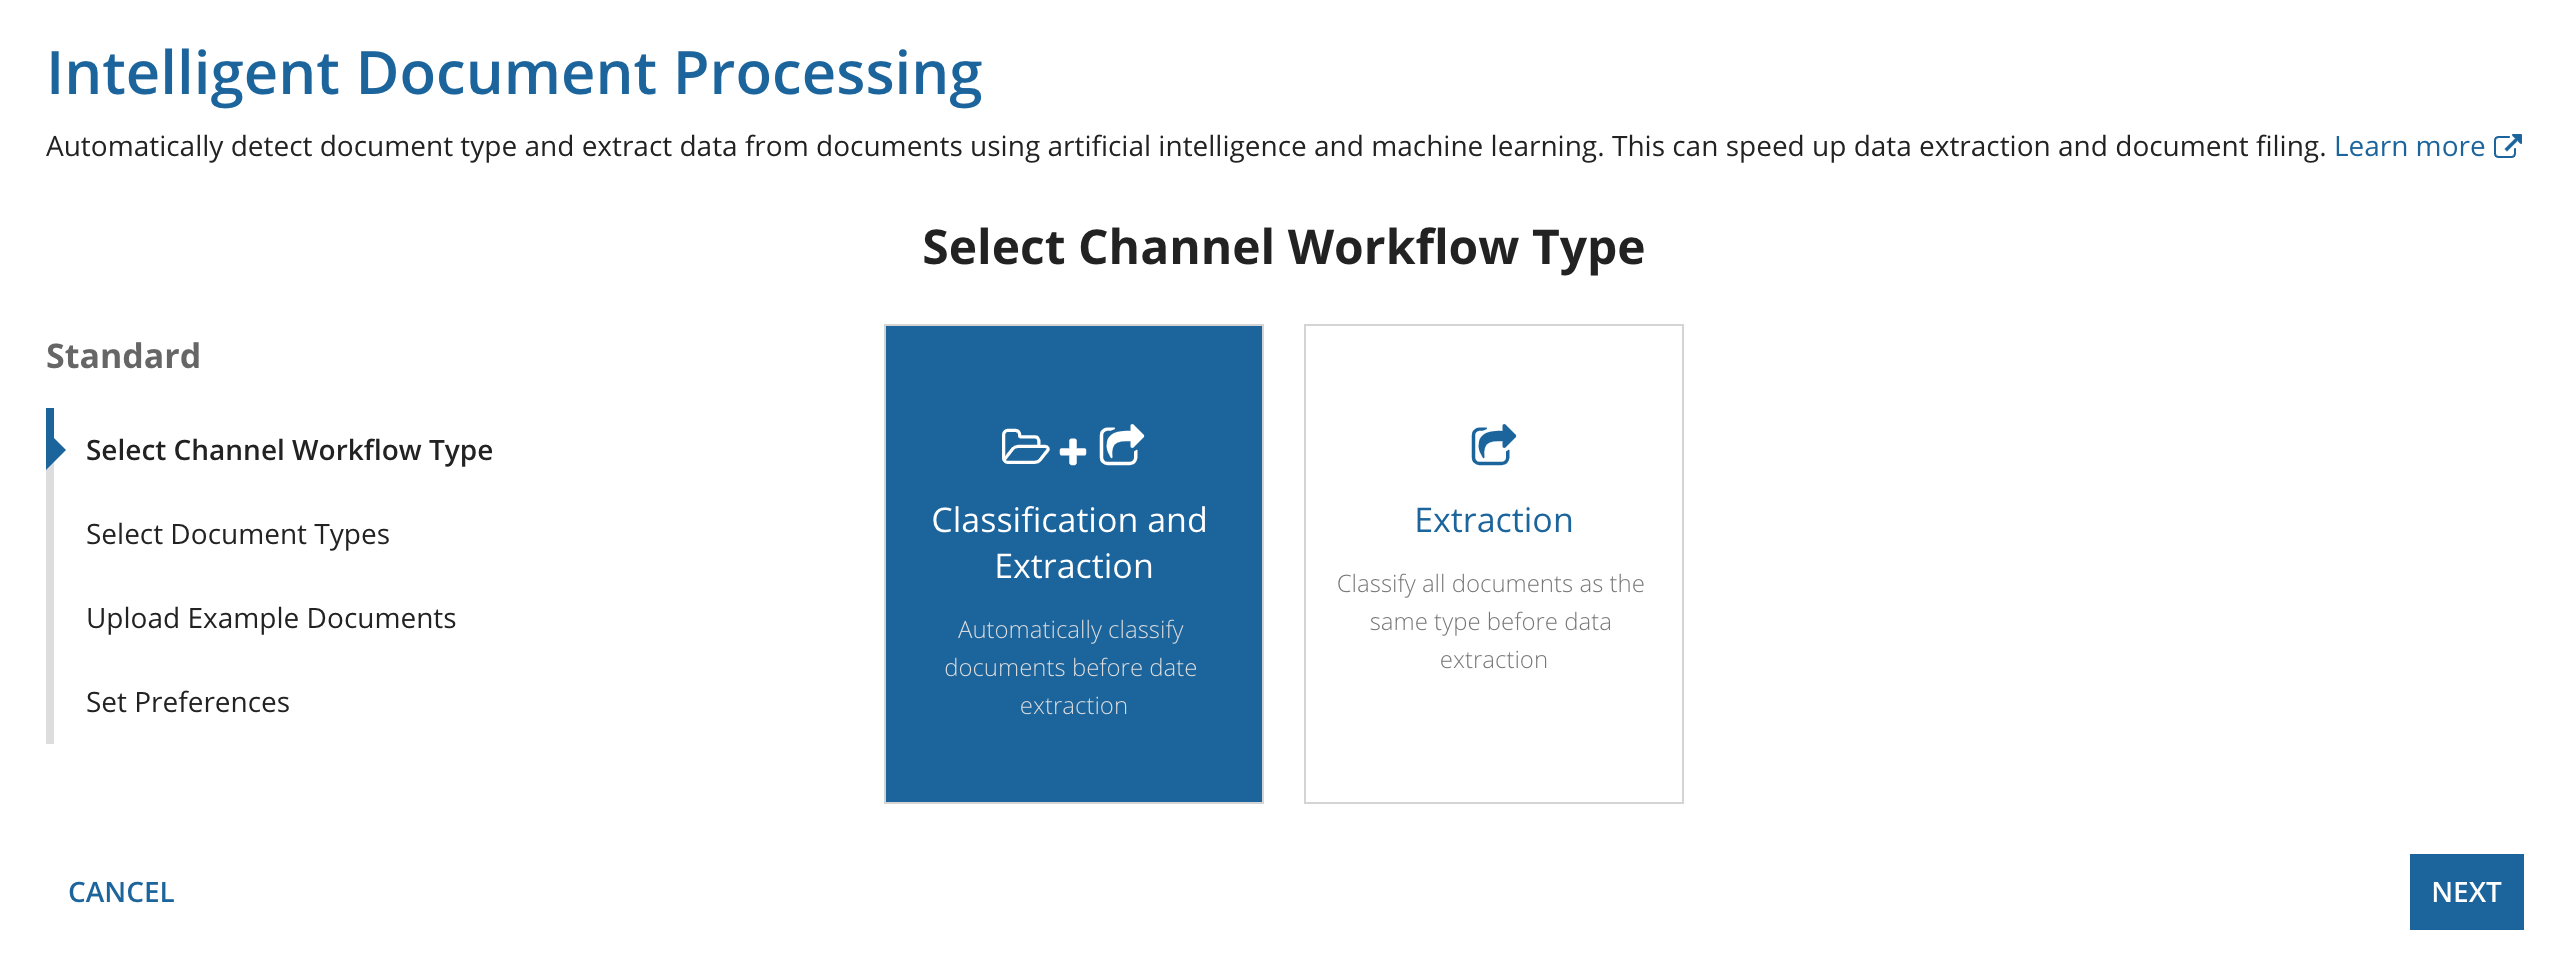 Select the channel workflow type